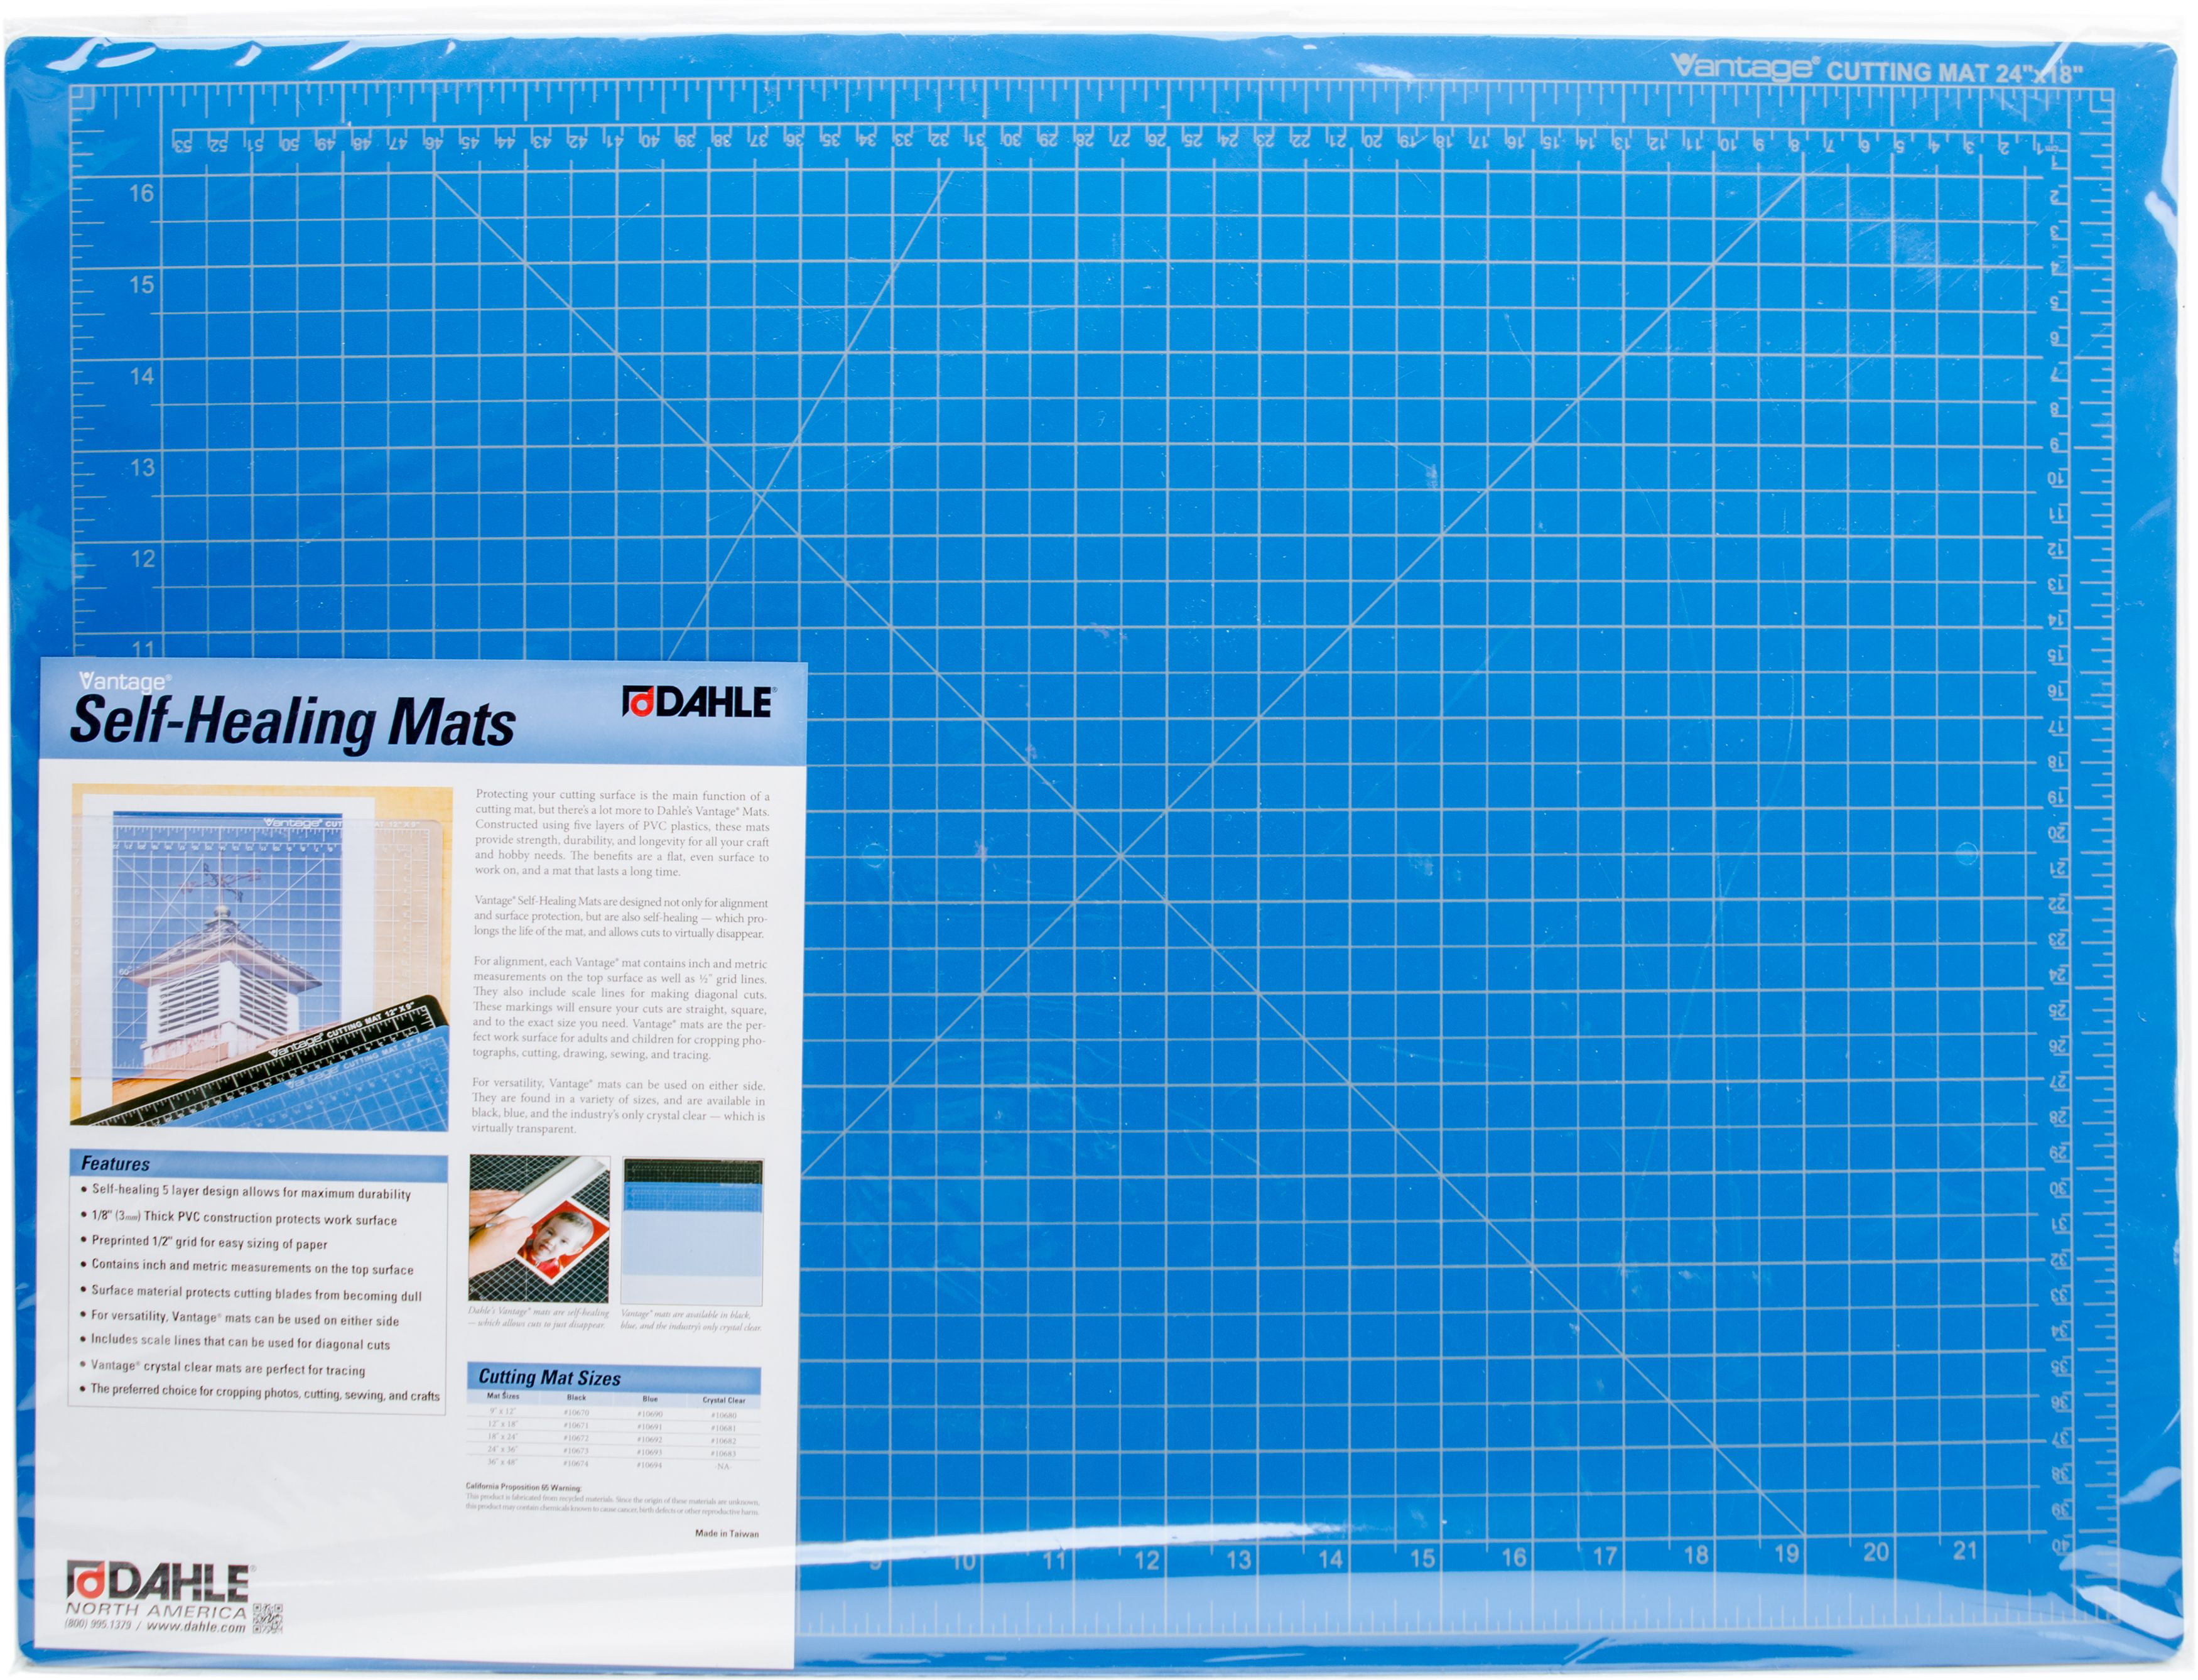 Dahle Vantage 10682 Self-Healing 5-Layer Cutting Mat Perfect for Crafts and Sewing 18 x 24 Clear Mat 